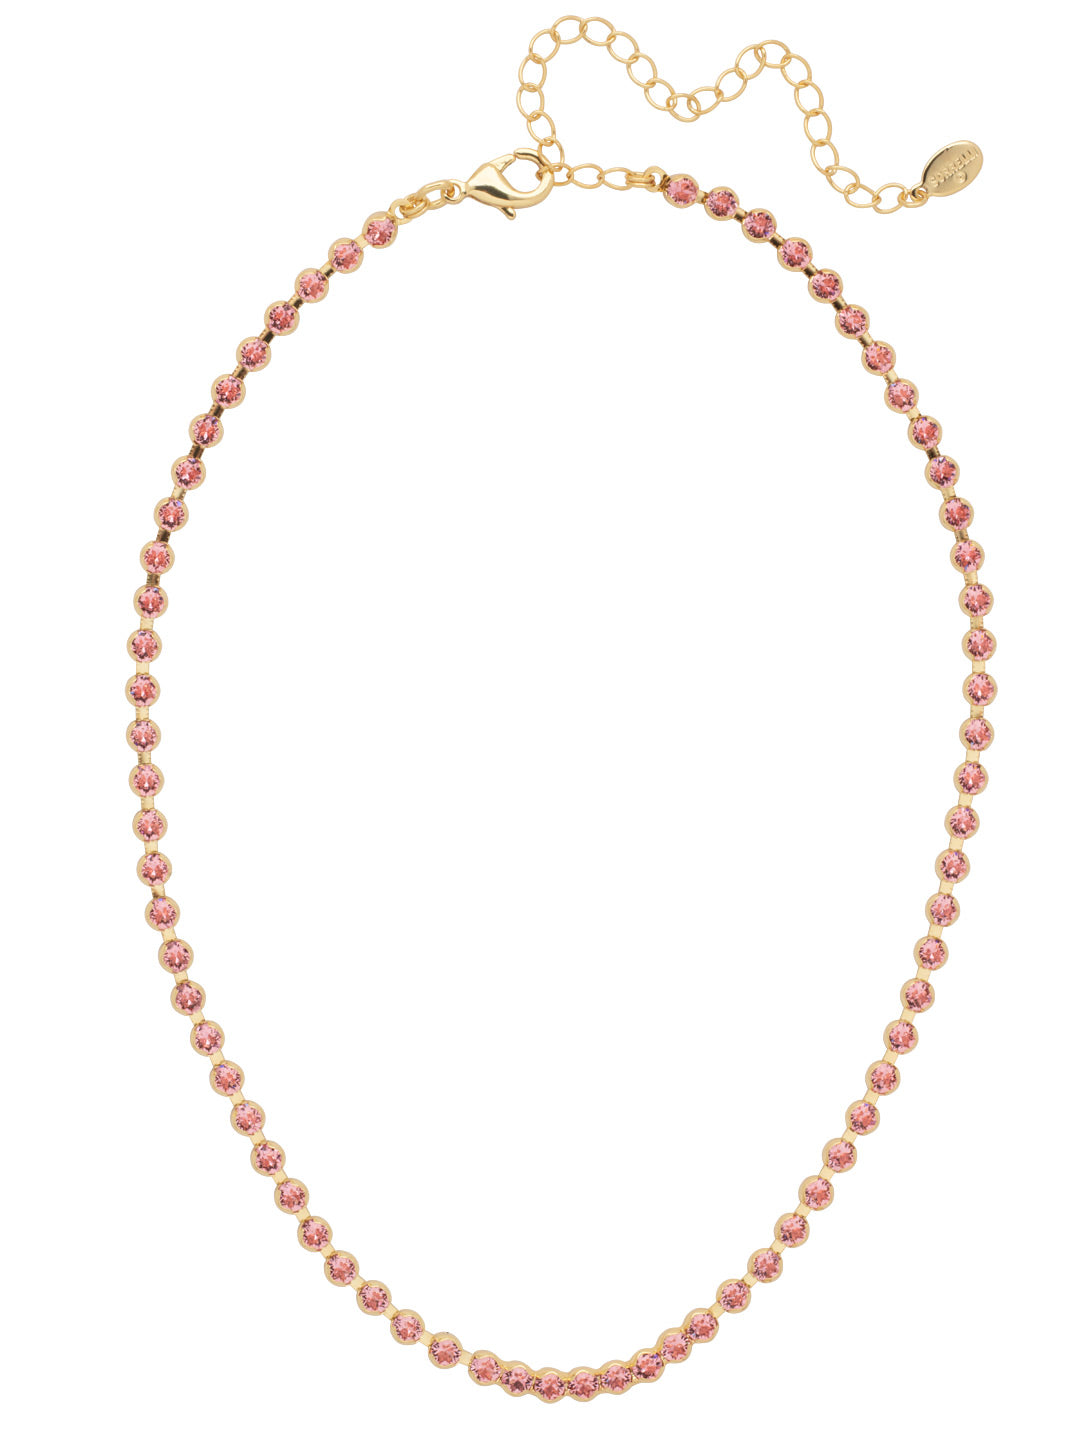 Marnie Tennis Necklace - NFA2BGLTR - <p>Perfect for dressing up or down, the classic Marnie Tennis Necklace features a repeating line of crystals secured by a lobster claw clasp. From Sorrelli's Light Rose collection in our Bright Gold-tone finish.</p>